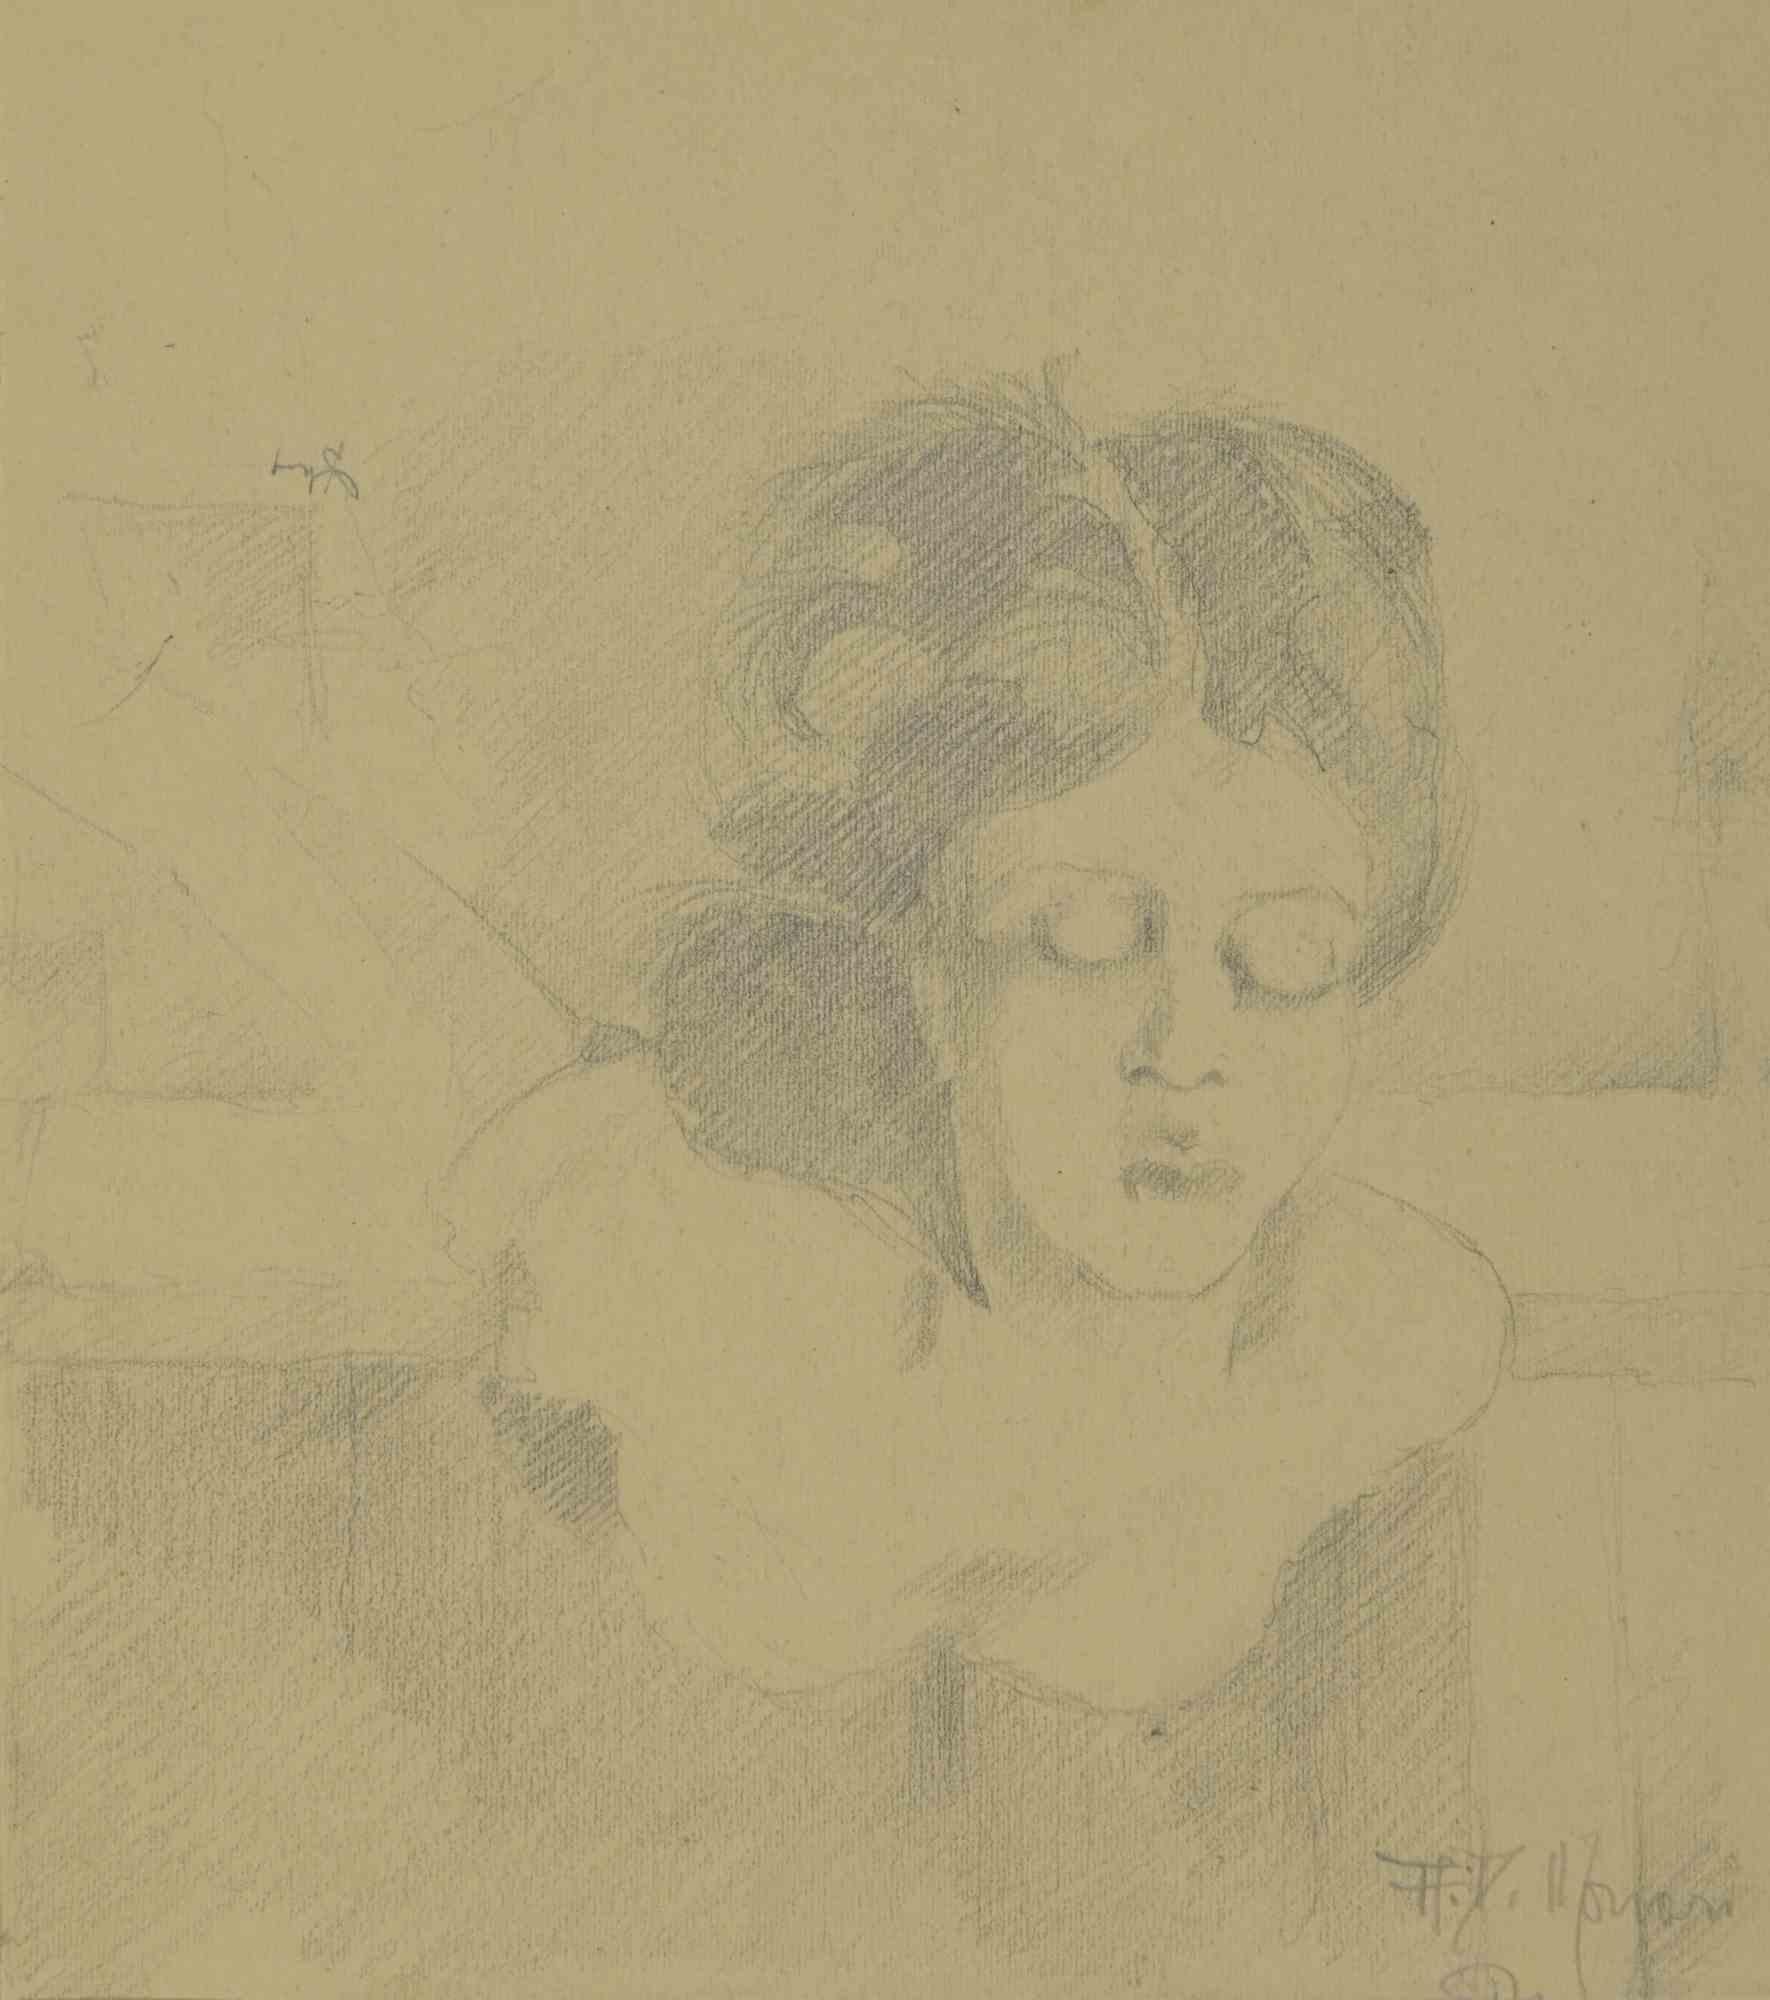 Portrait is a Drawing in pencil realized by  Augusto Monari in the Early-20th Century.

Hand-signed on the lower.

Good conditions, including a creamy-colored Passepartout.

The artwork is depicted through confident strokes in a well-balanced